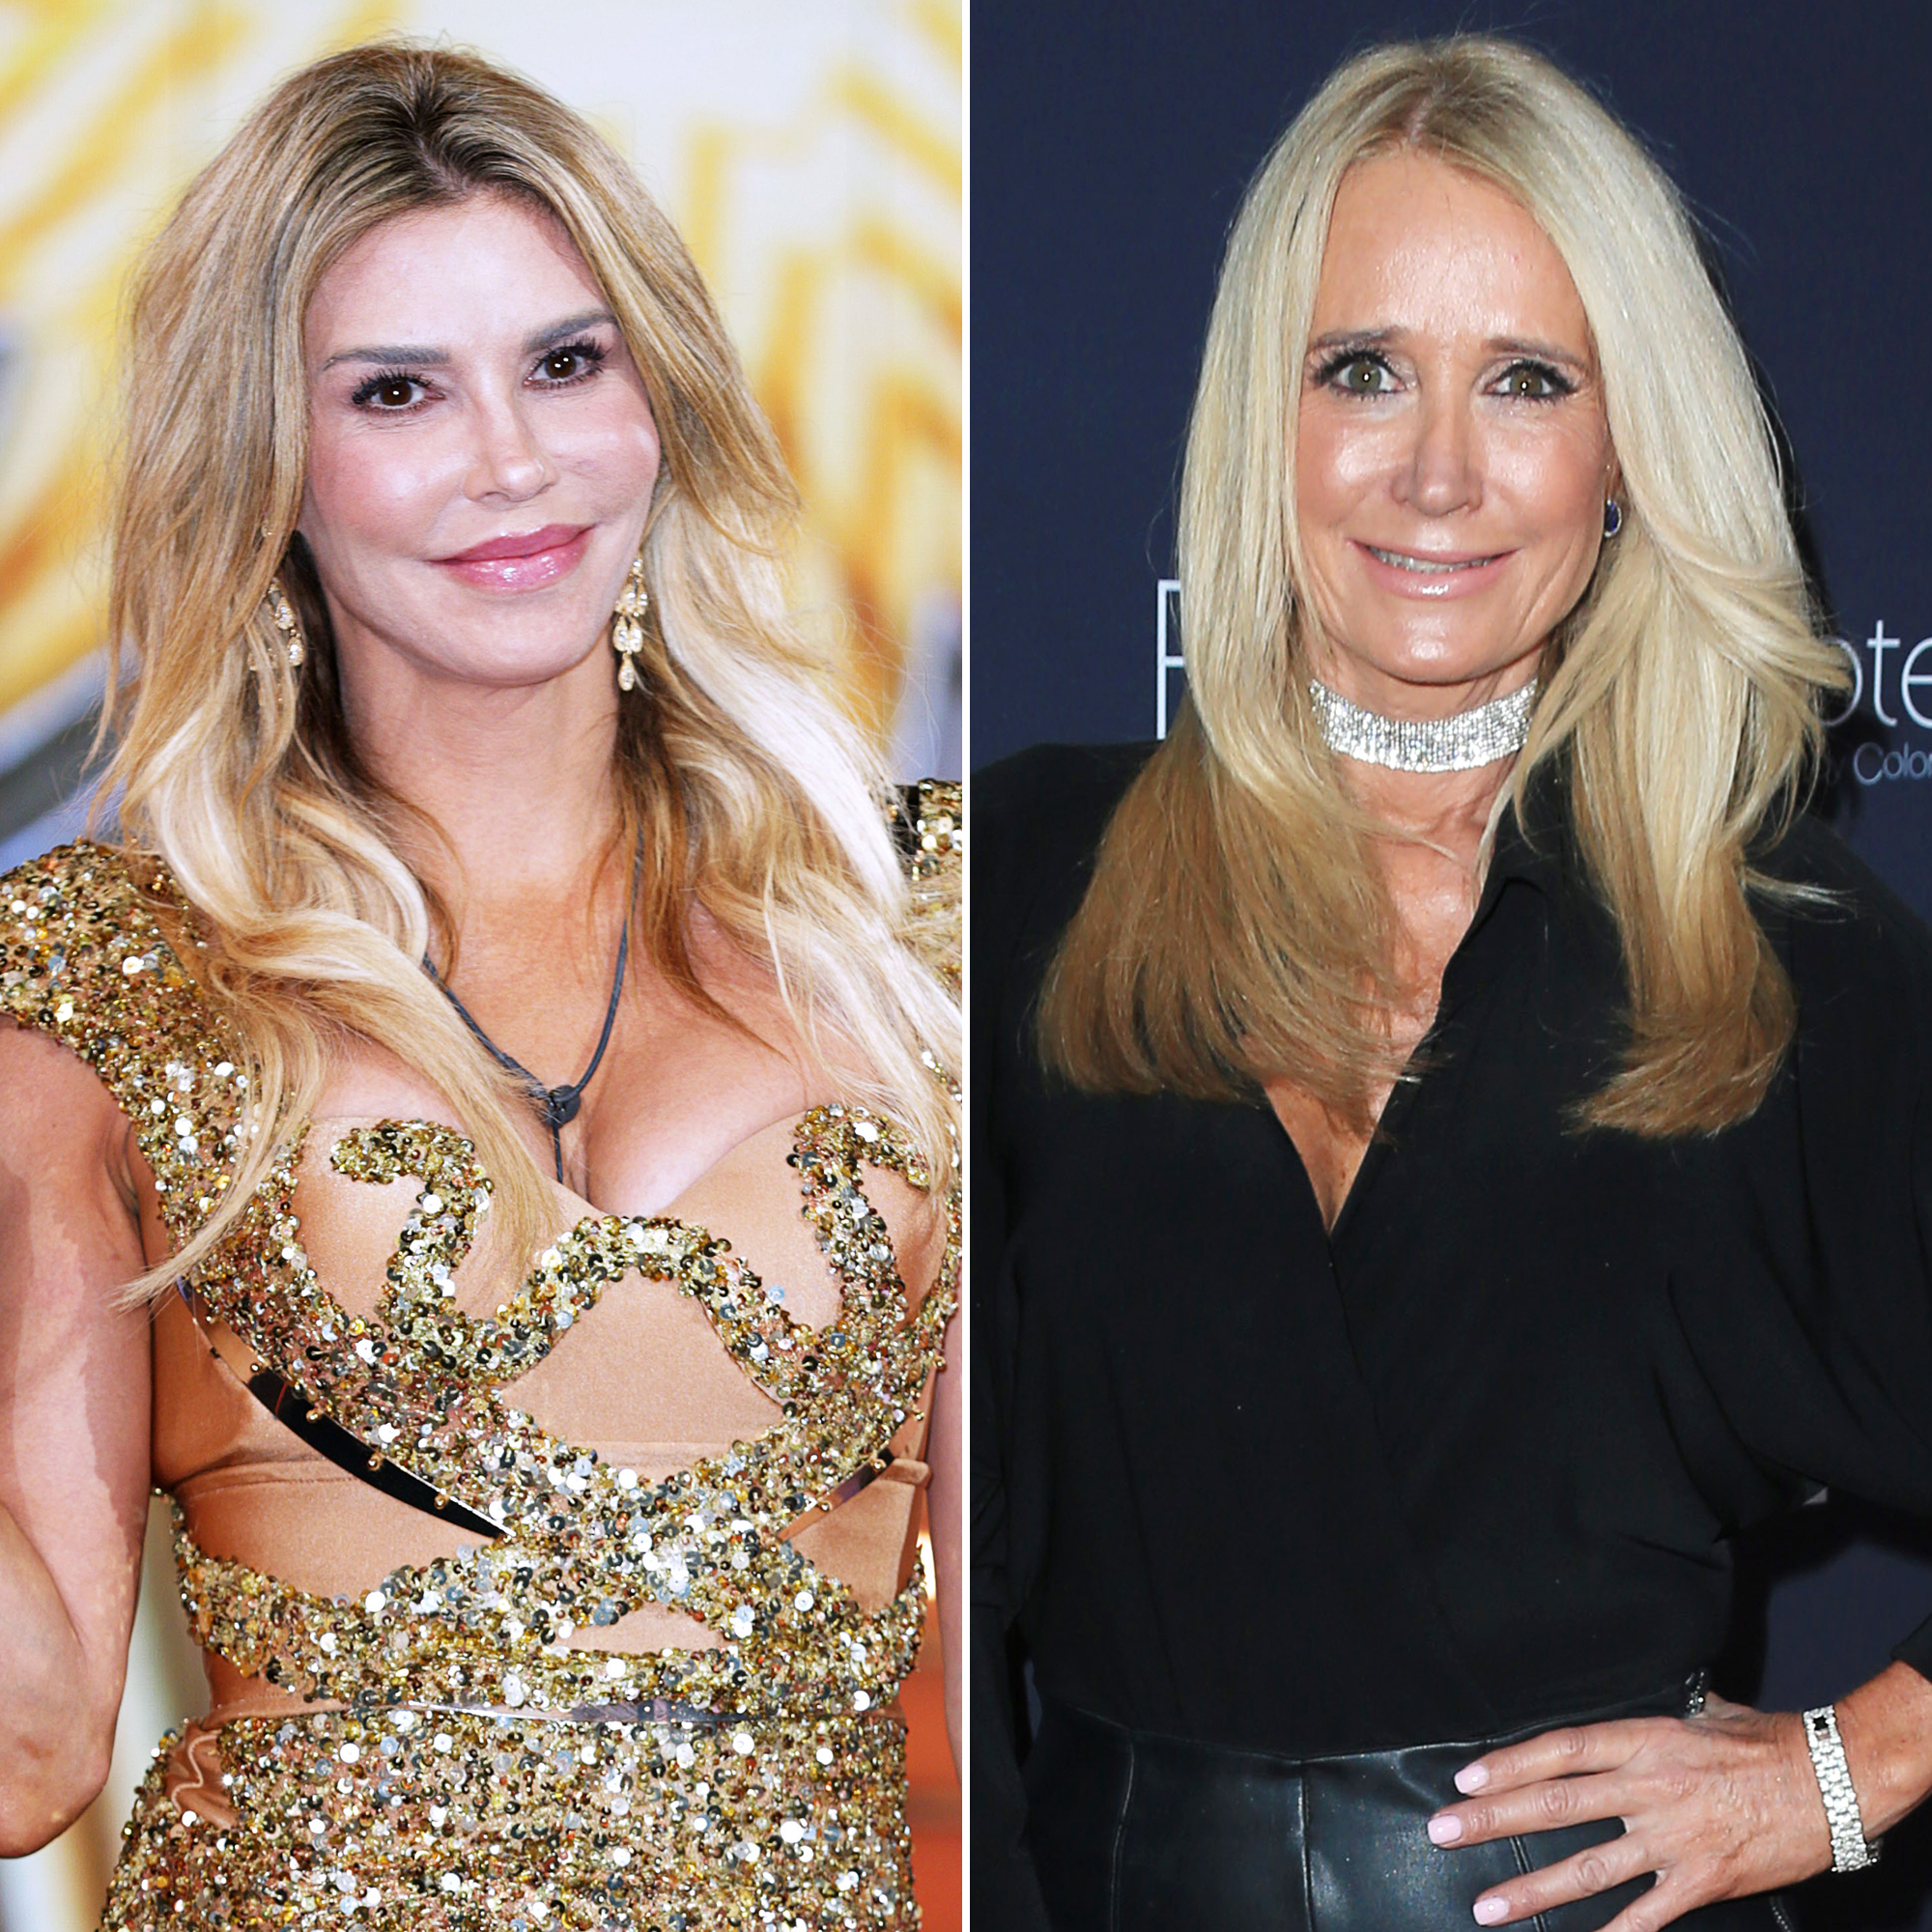 Brandi Glanville Isnt Speaking to Kim Richards After Hot Tub Fight picture